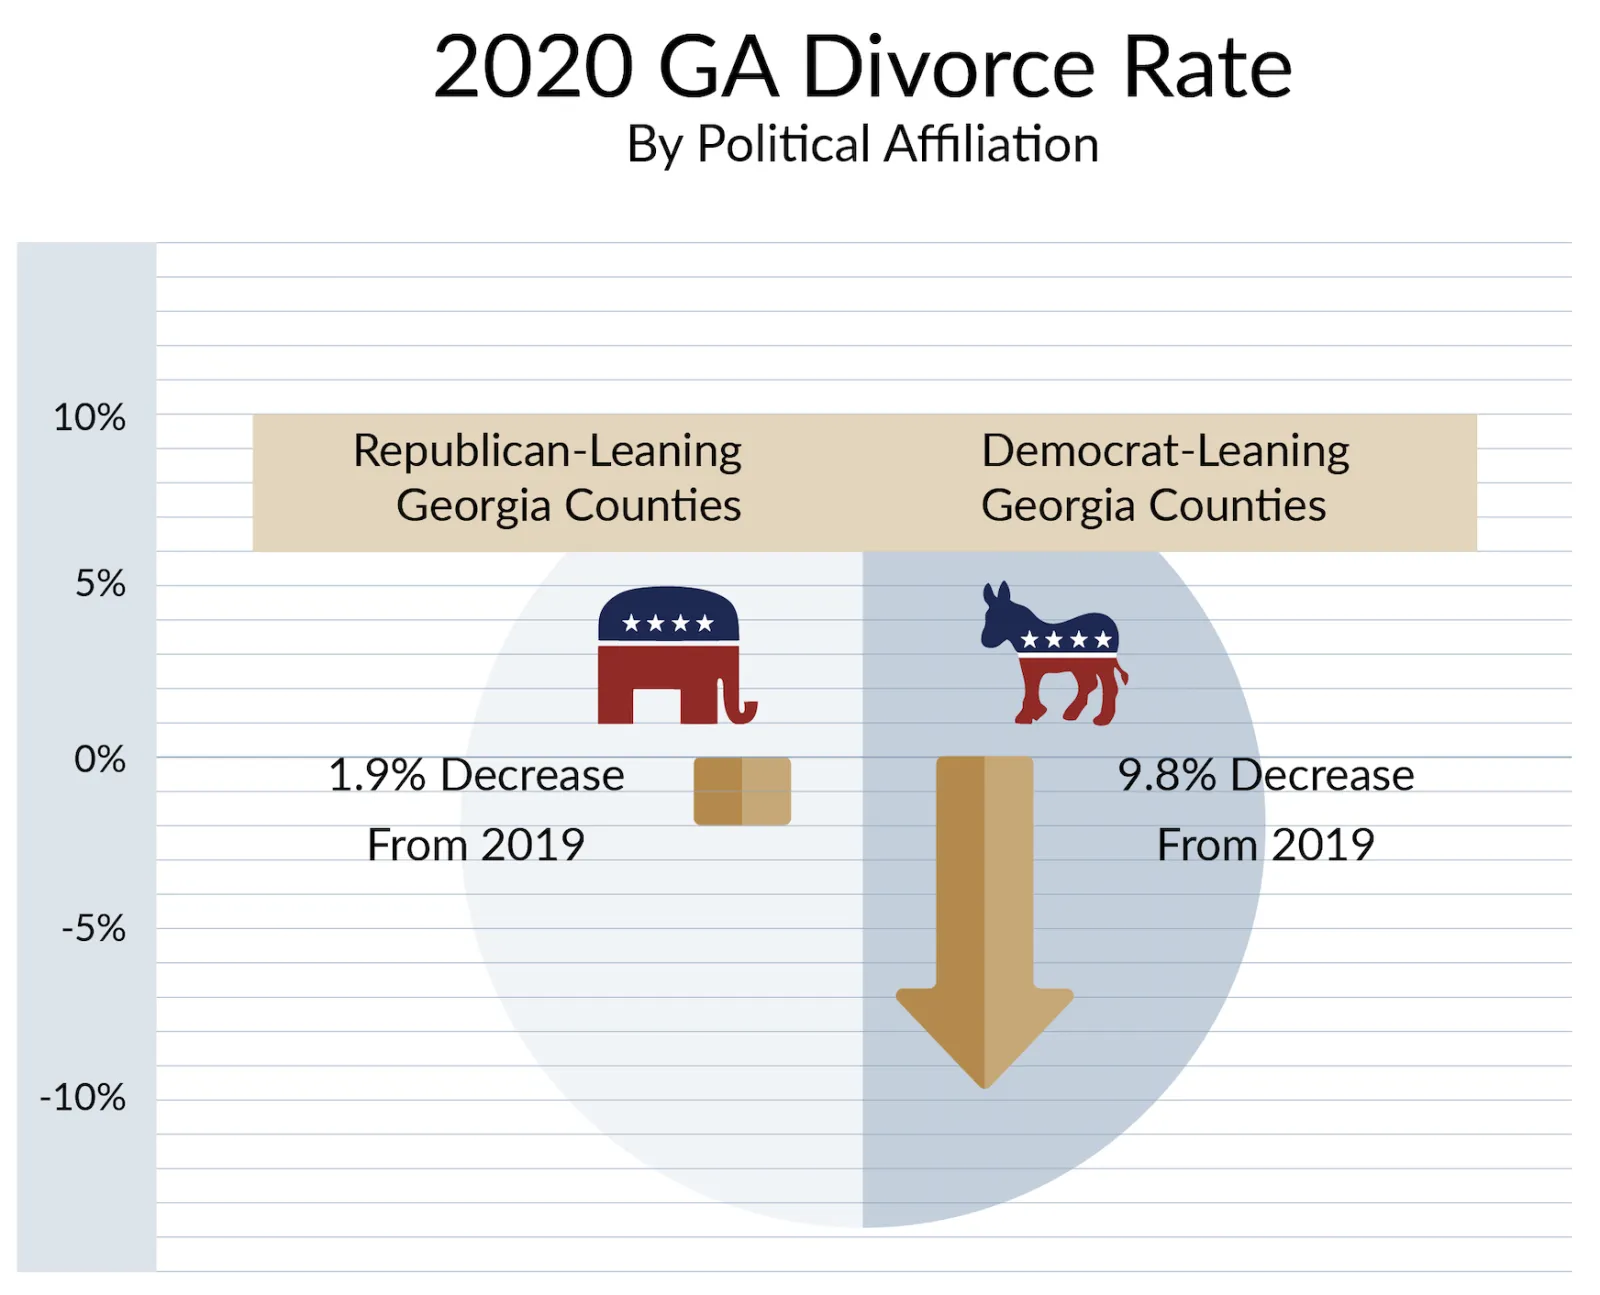 COVID Pandemic caused the divorce rate to decrease in democrat leaning counties and it caused only a slight decrease for Republican leaning counties.